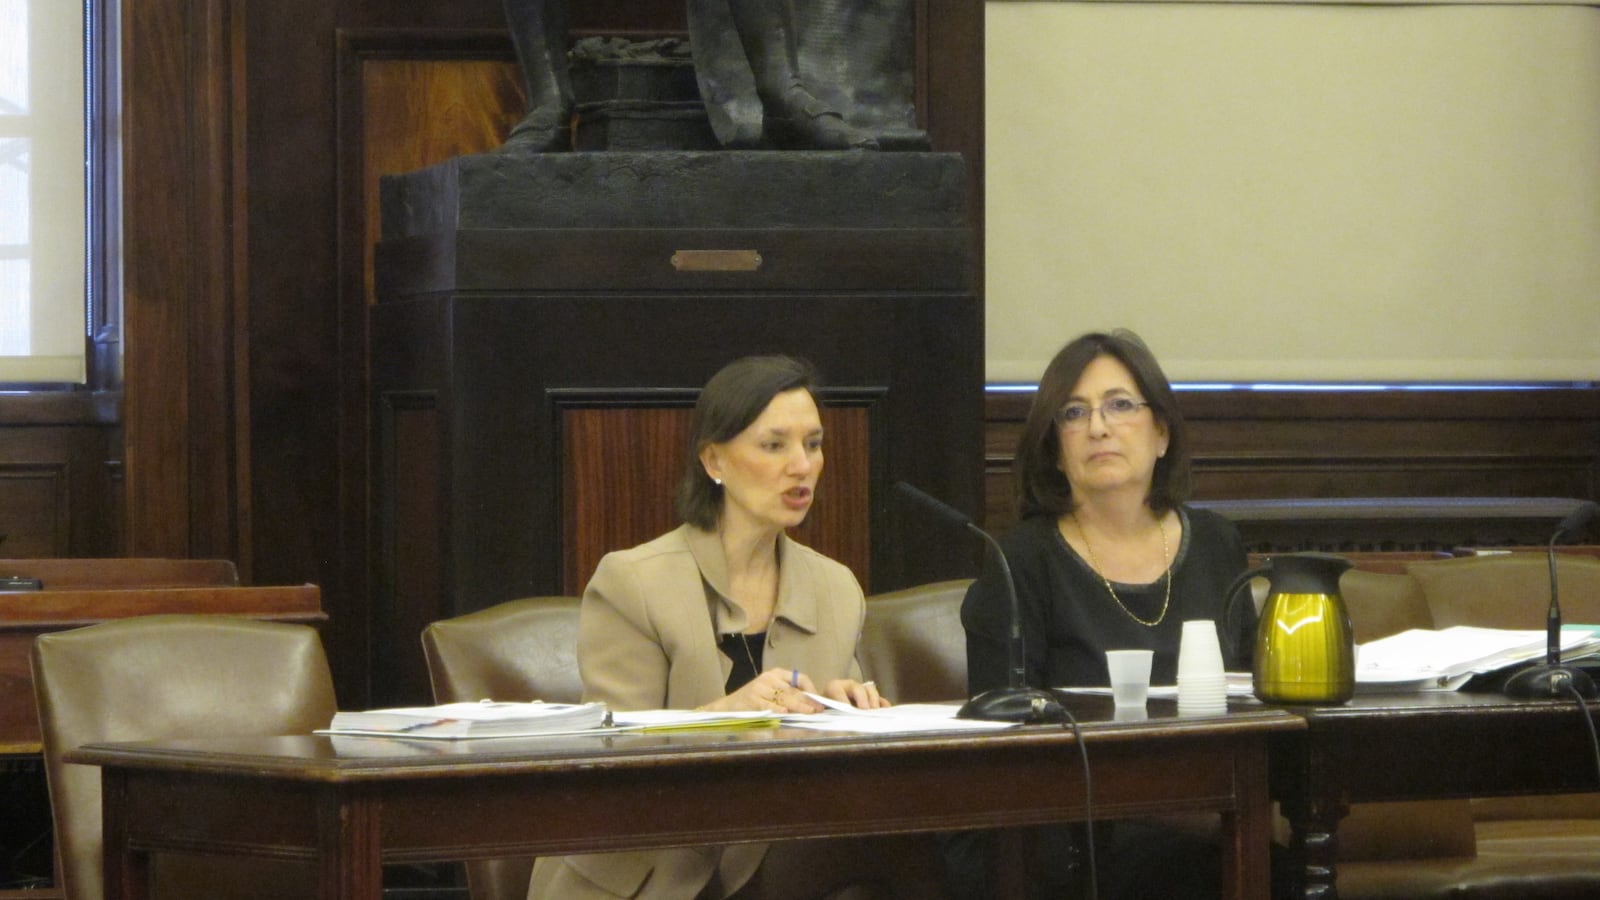 Acting Deputy Chancellor for Operations Elizabeth Rose and School Construction Authority CEO Lorraine Grillo testify at a City Council Education Committee hearing on school space.